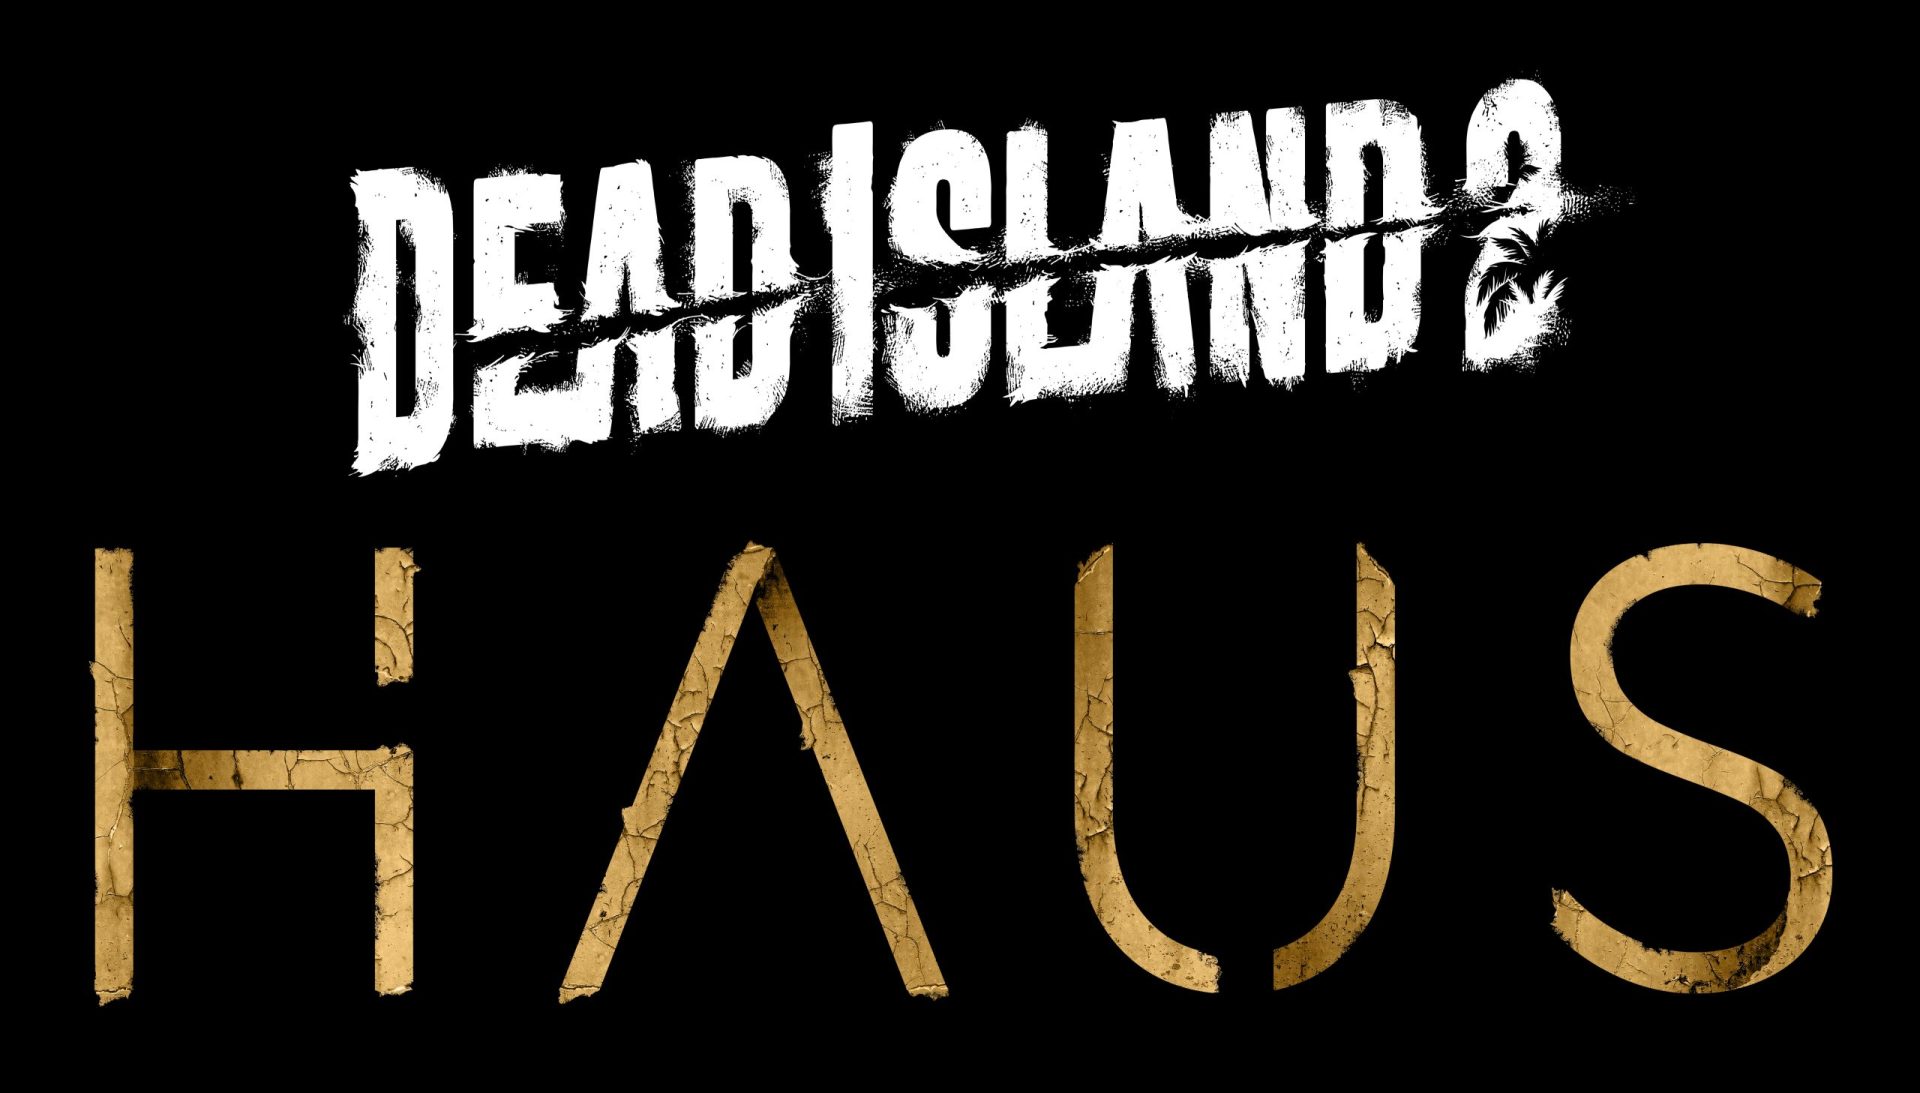 Dead Island 2 Haus DLC Launch Trailer Released - Insider Gaming